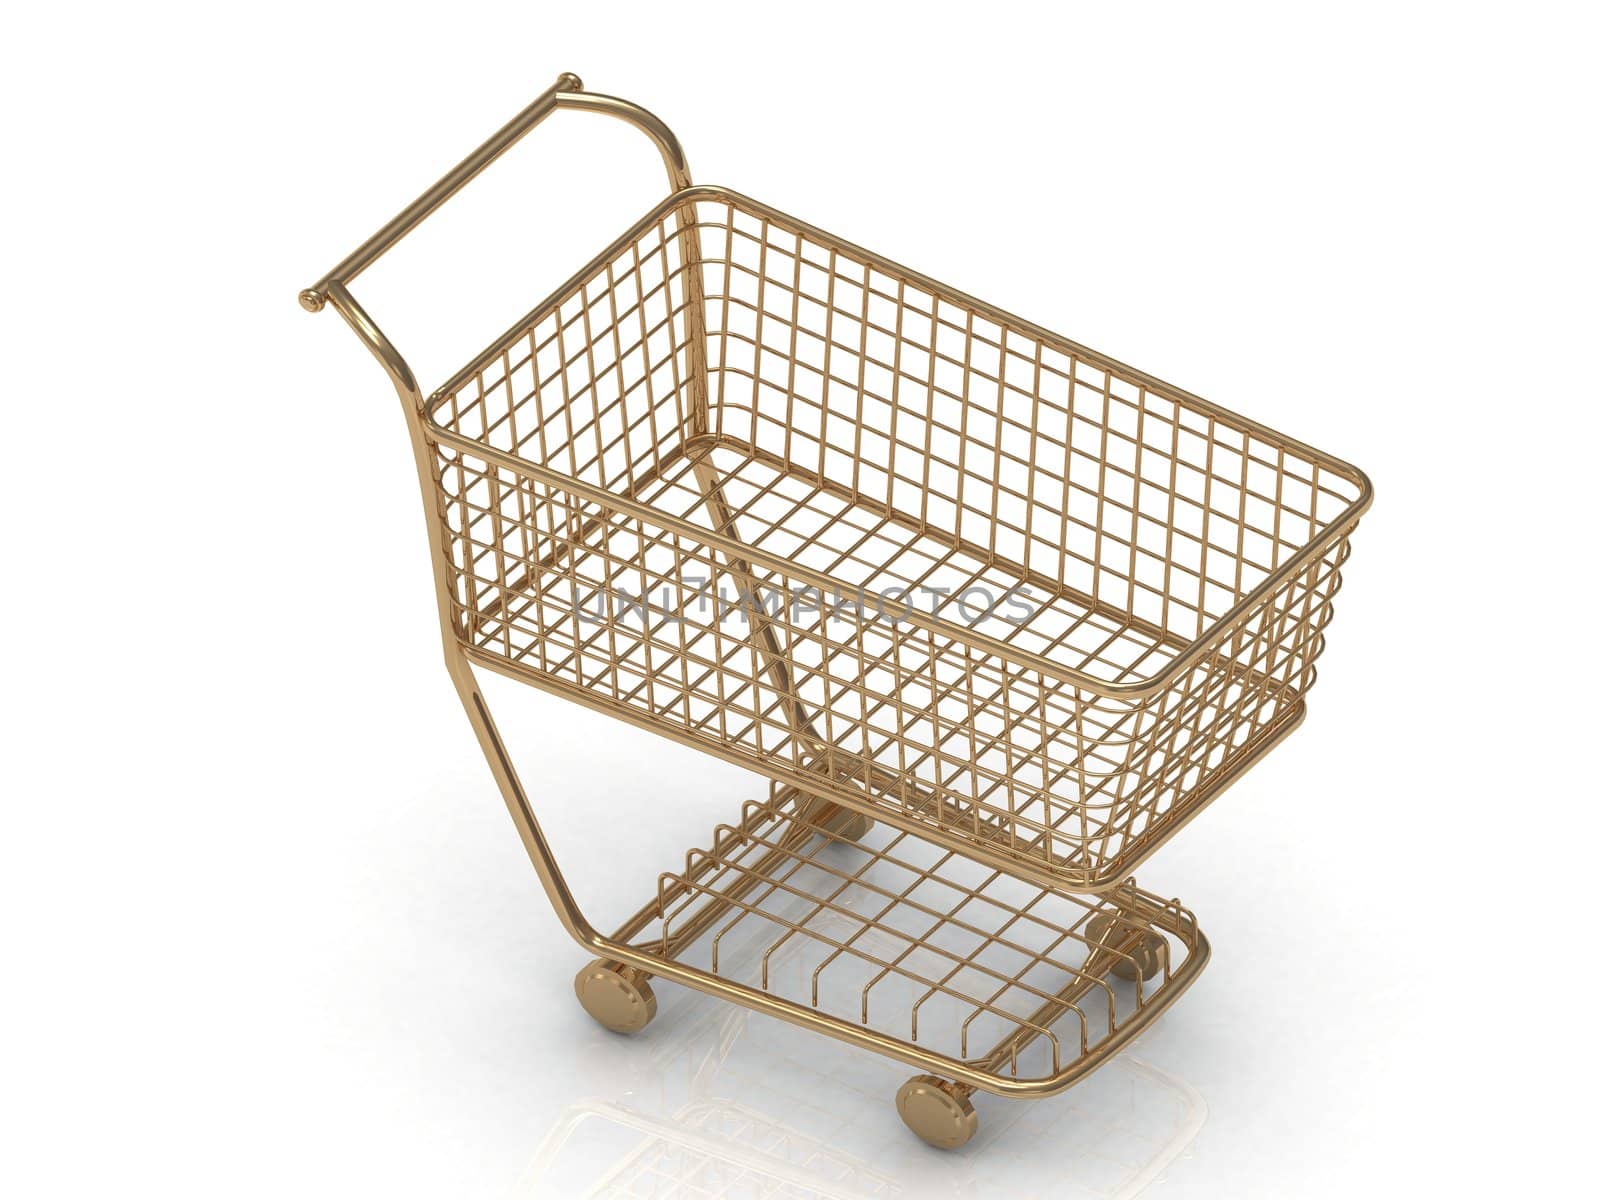 Gold shopping trolley (basket) in high definition isolated on a white background